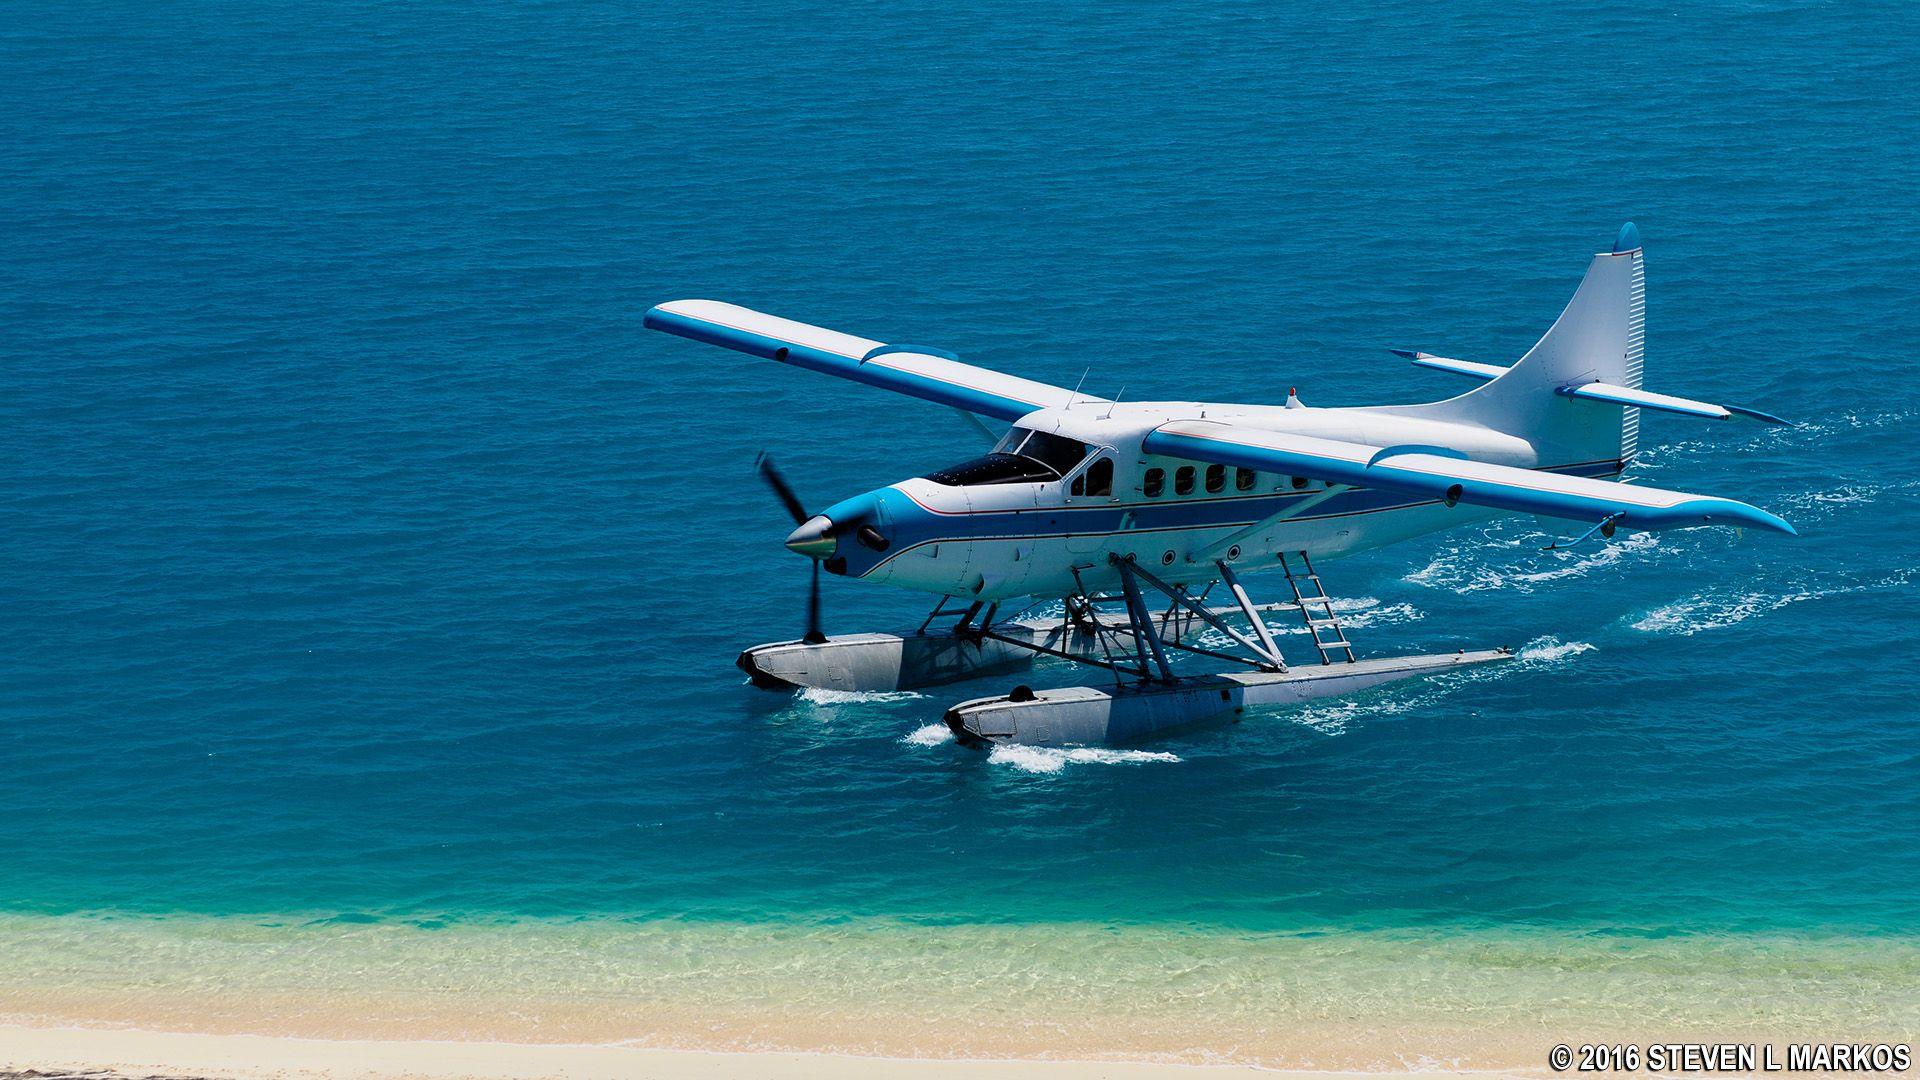 Dry Tortugas National Park. ARRIVING BY SEAPLANE